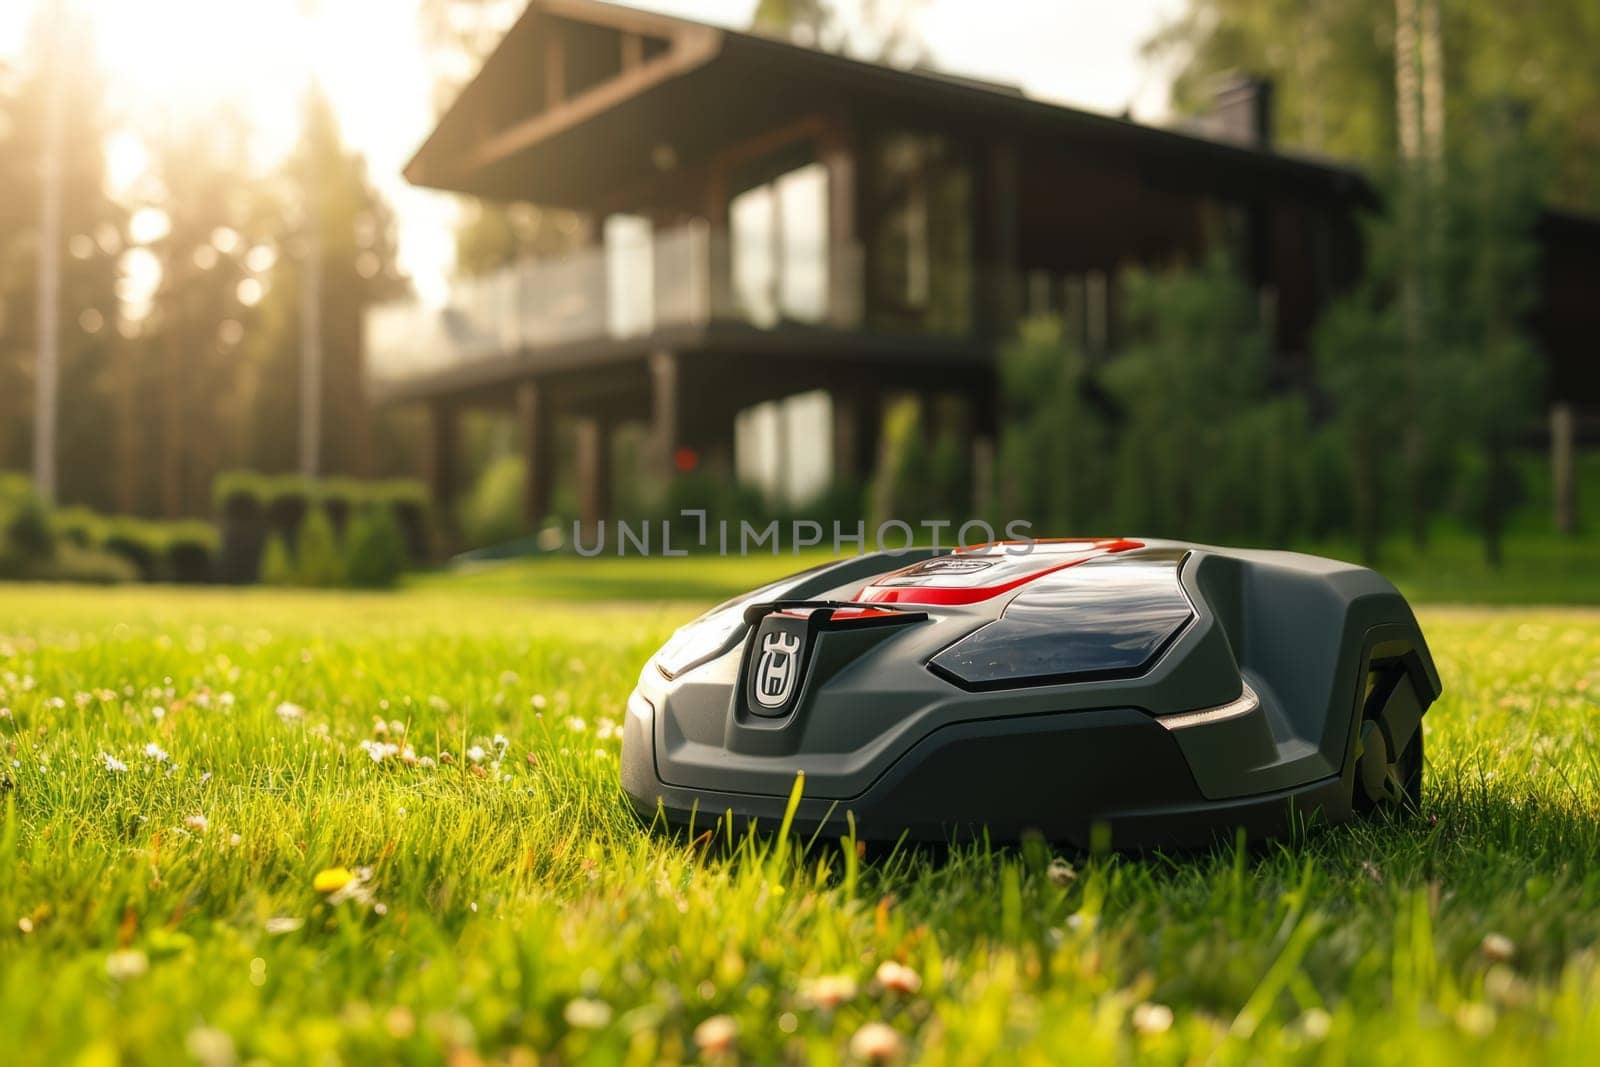 Automatic futuristic robotic lawn mower on a green lawn by rusak